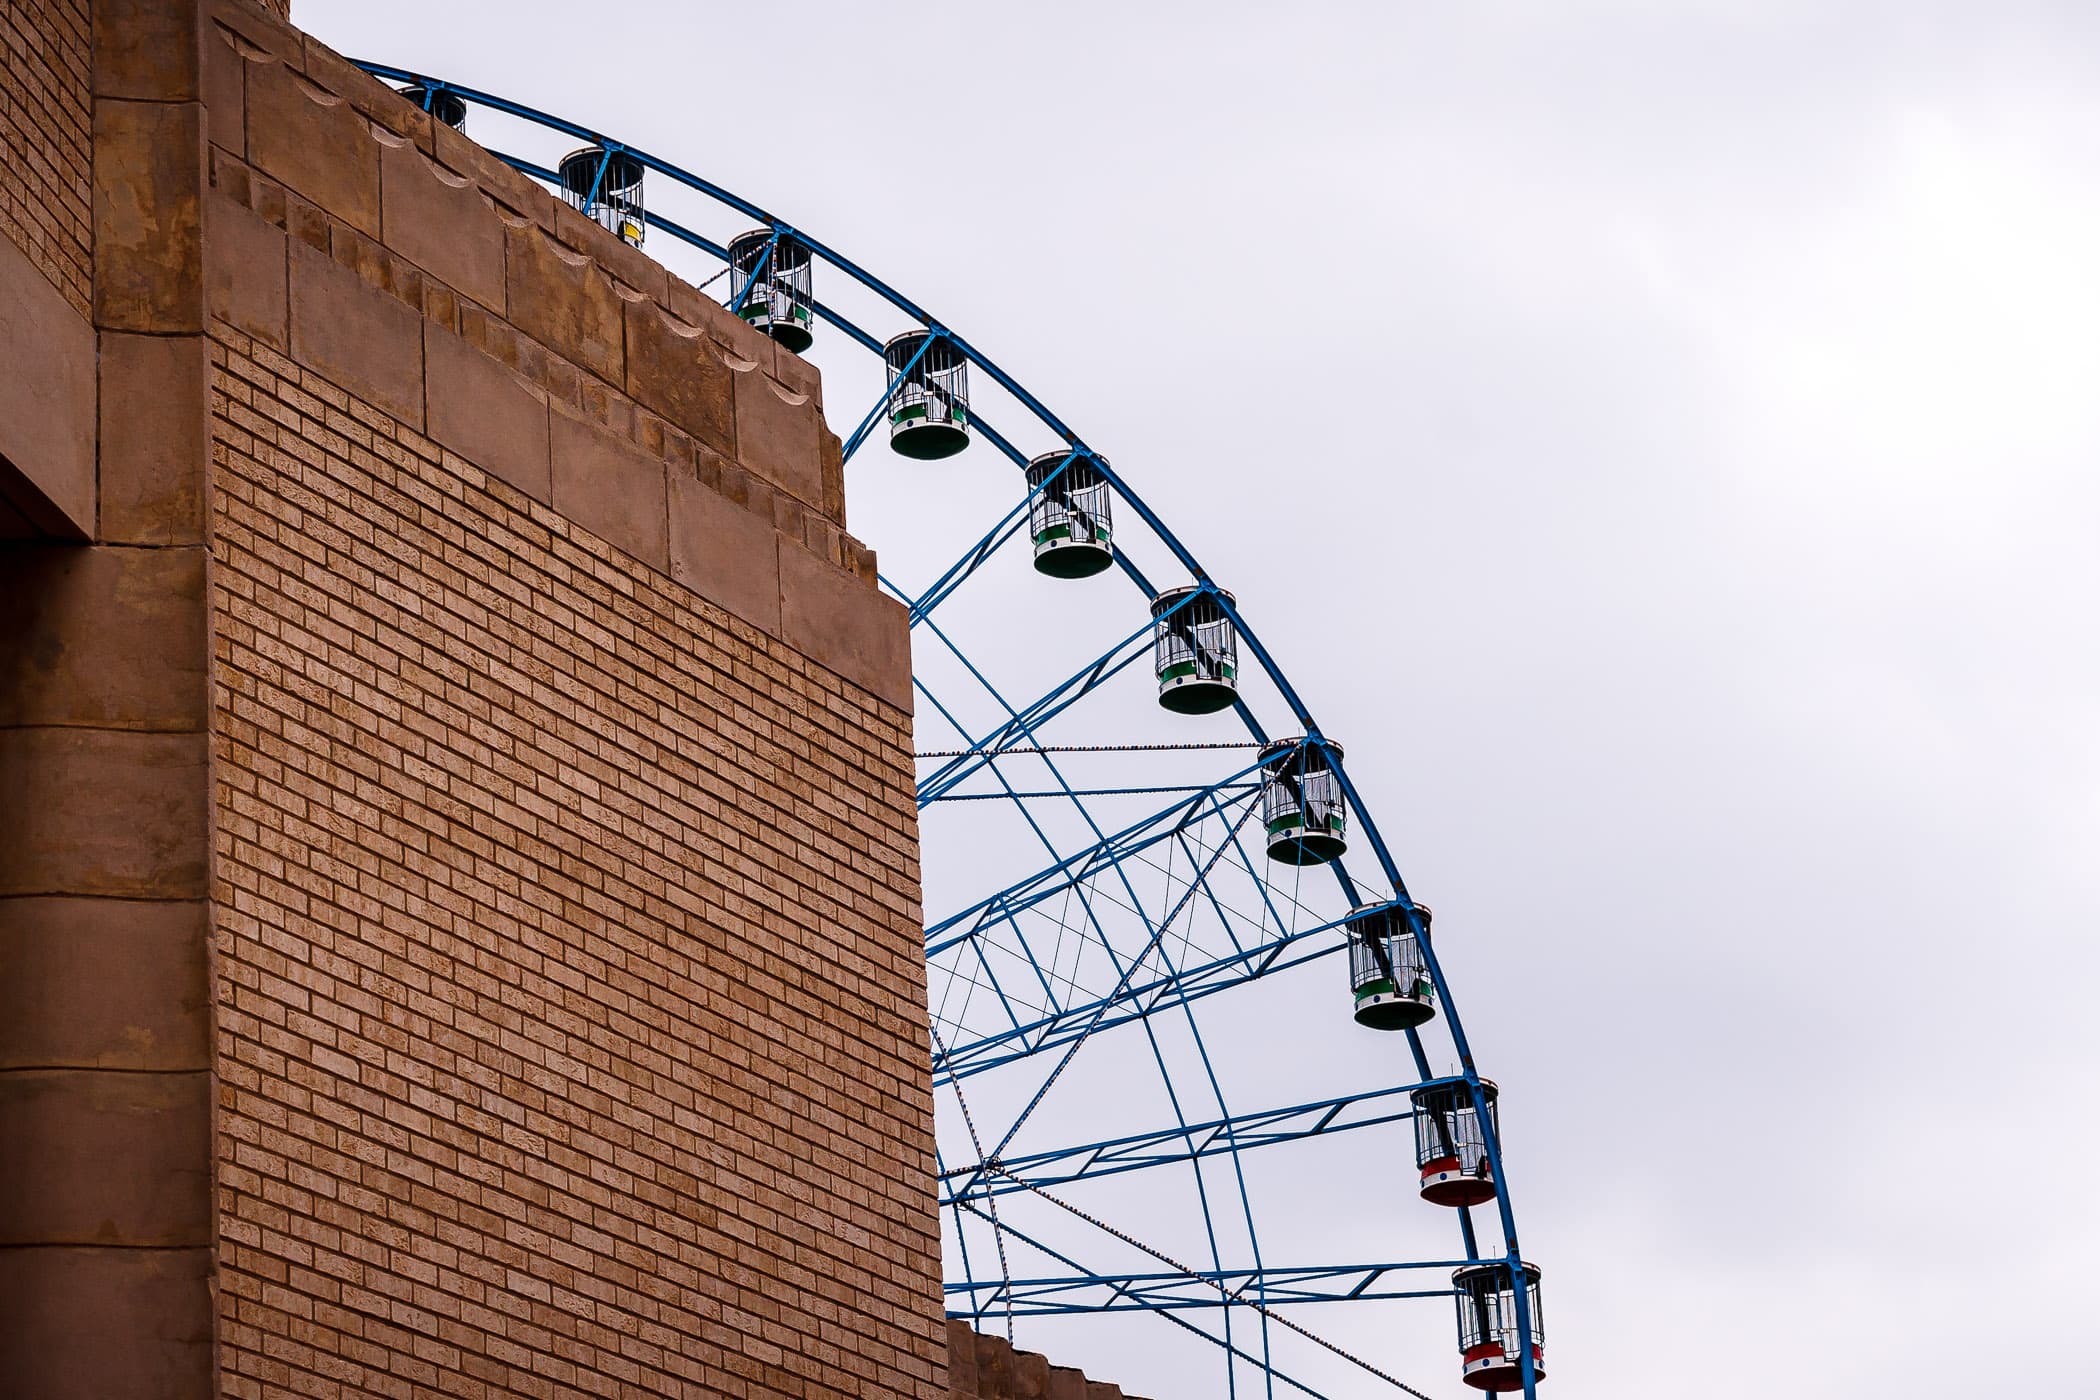 The Texas Star Ferris wheel peeks out from behind a wall of an adjacent building at Fair Park, Dallas.